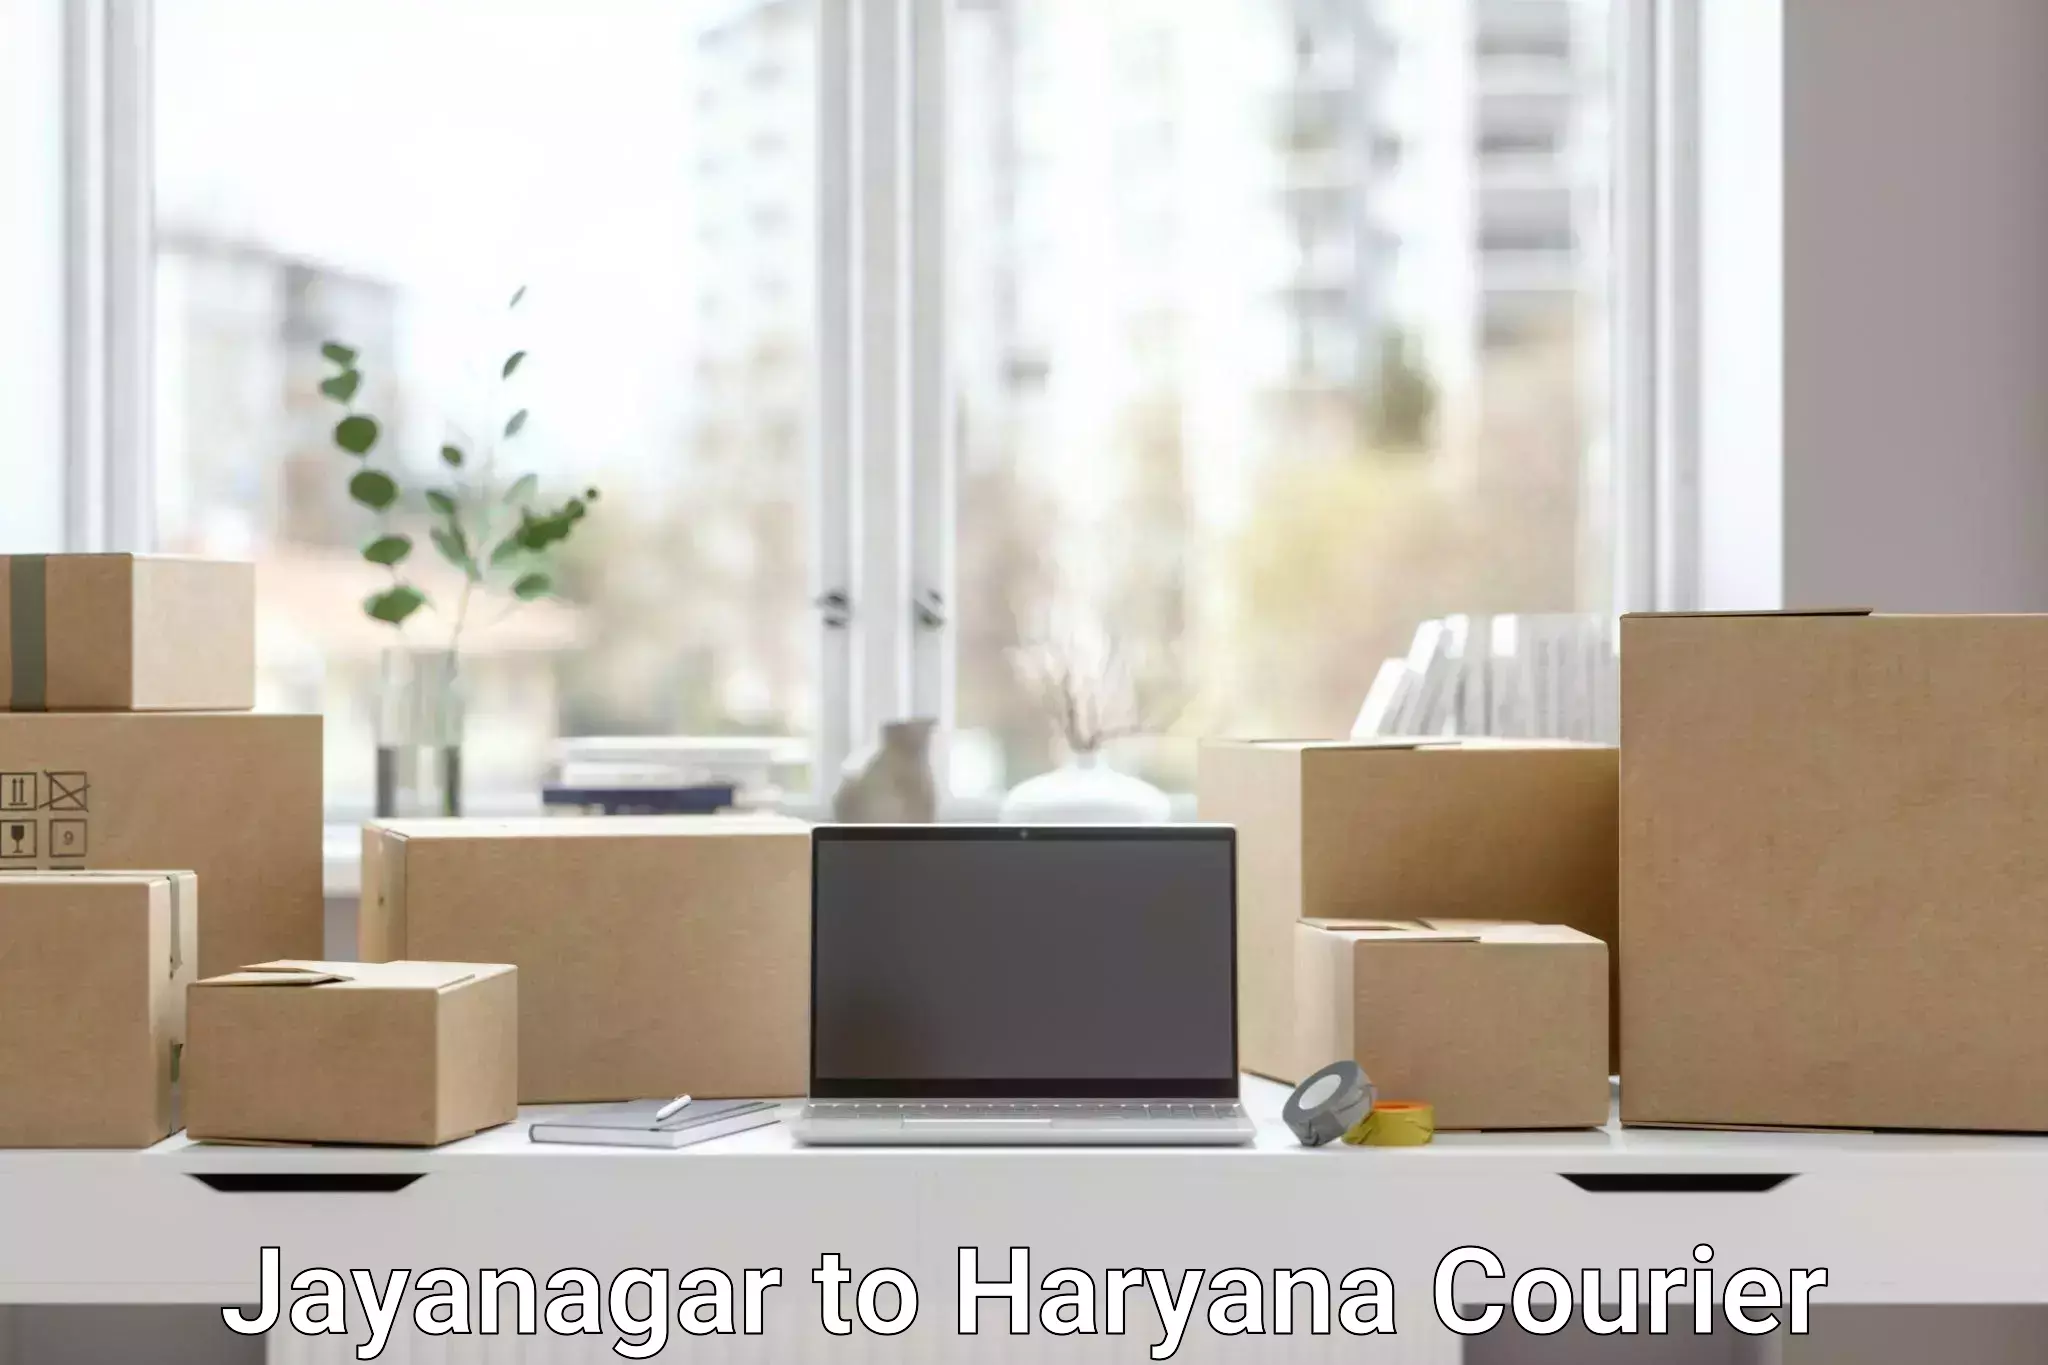 Global courier networks Jayanagar to Faridabad